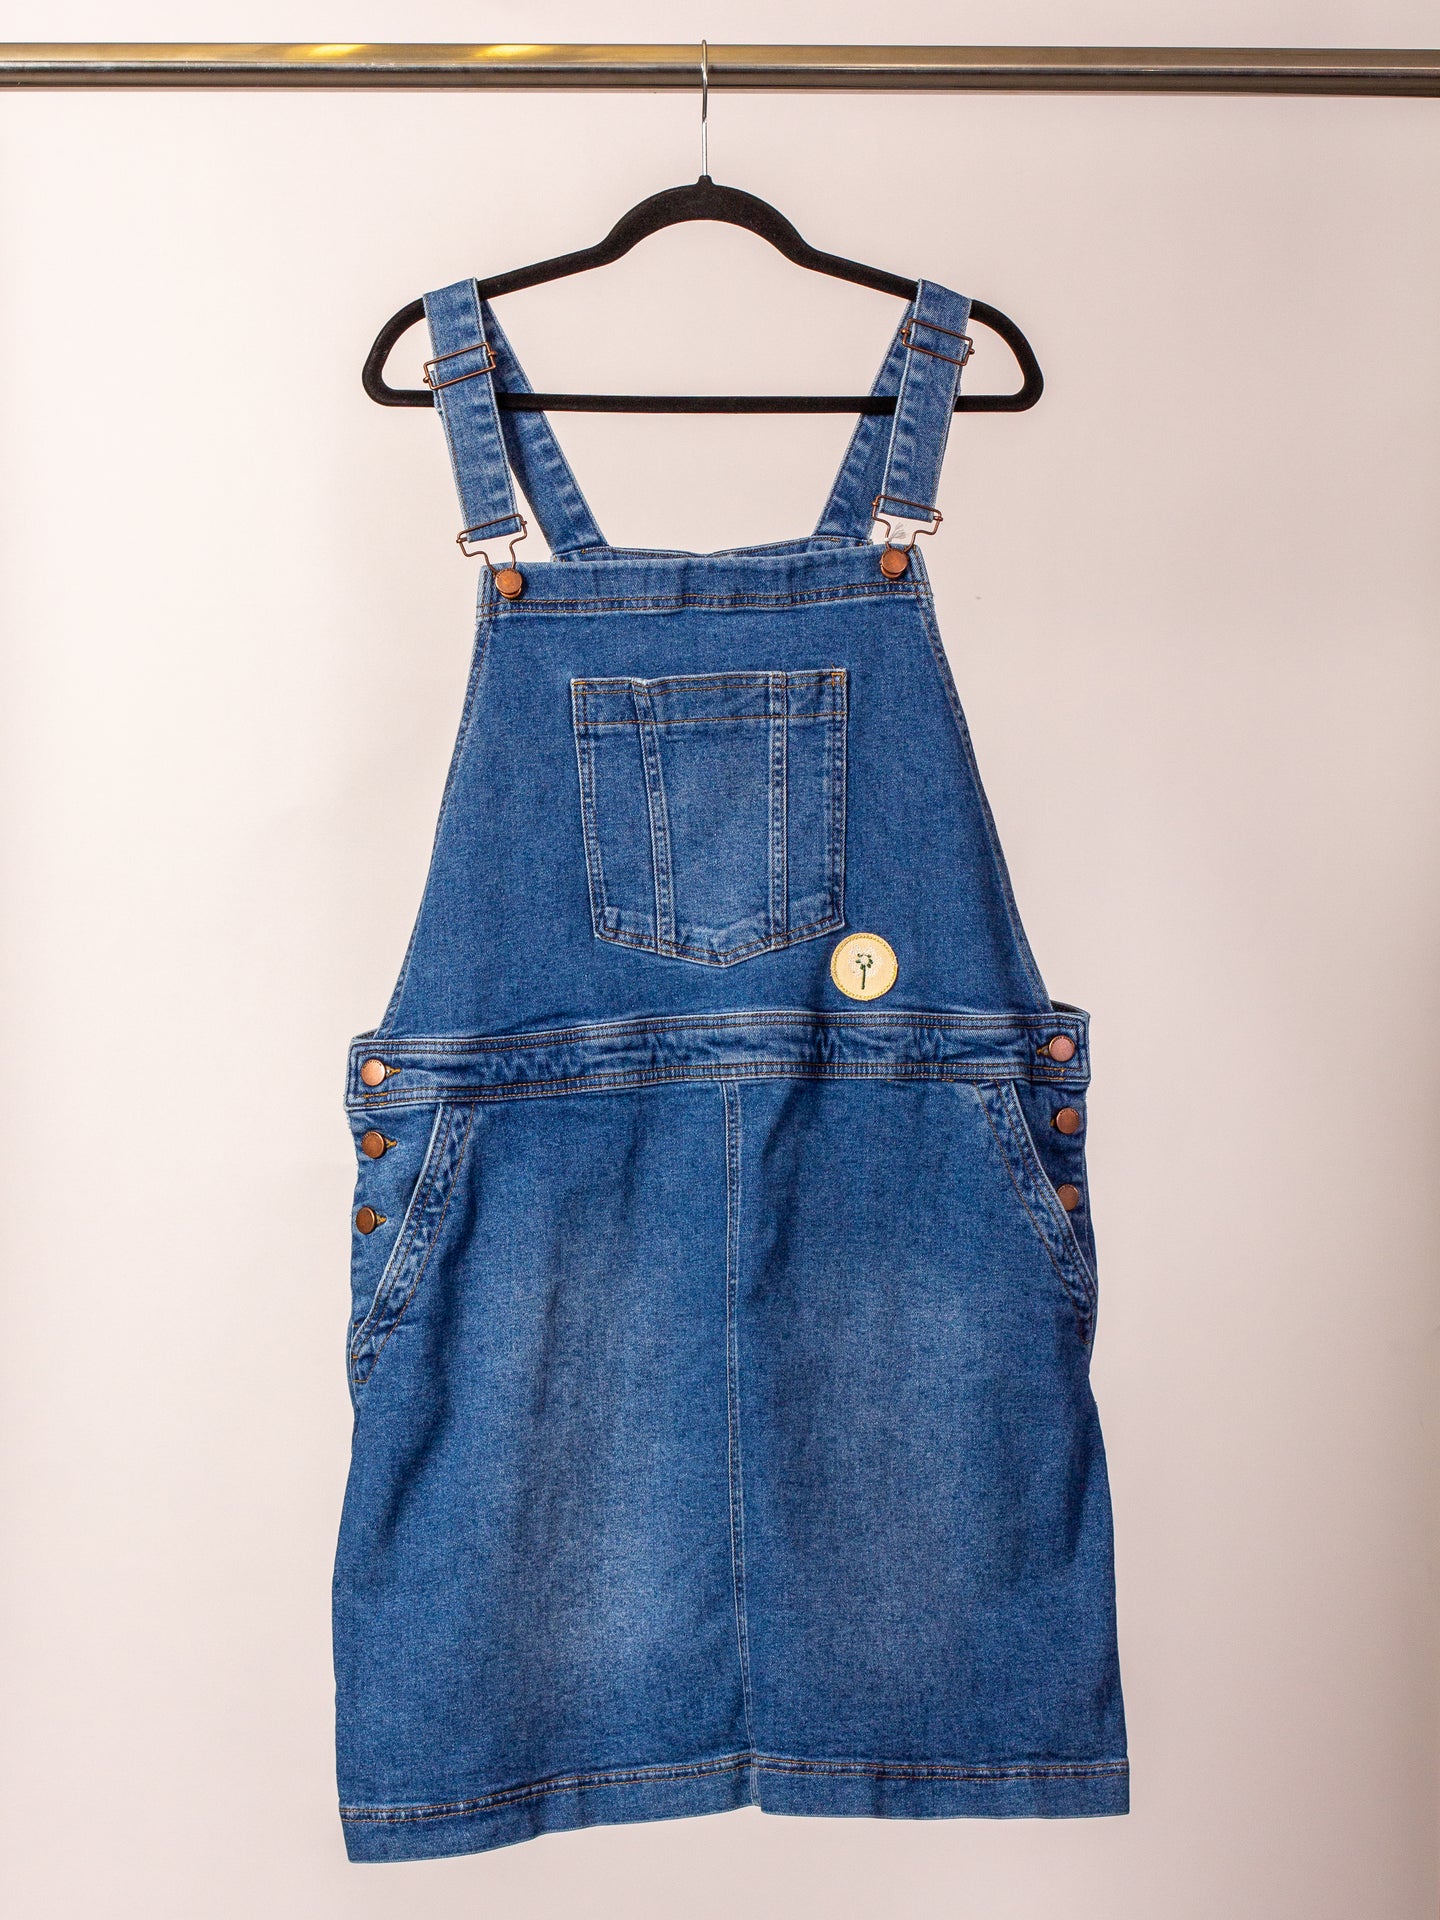 Boden Upcycled Overall Dress (sz. 20/22)